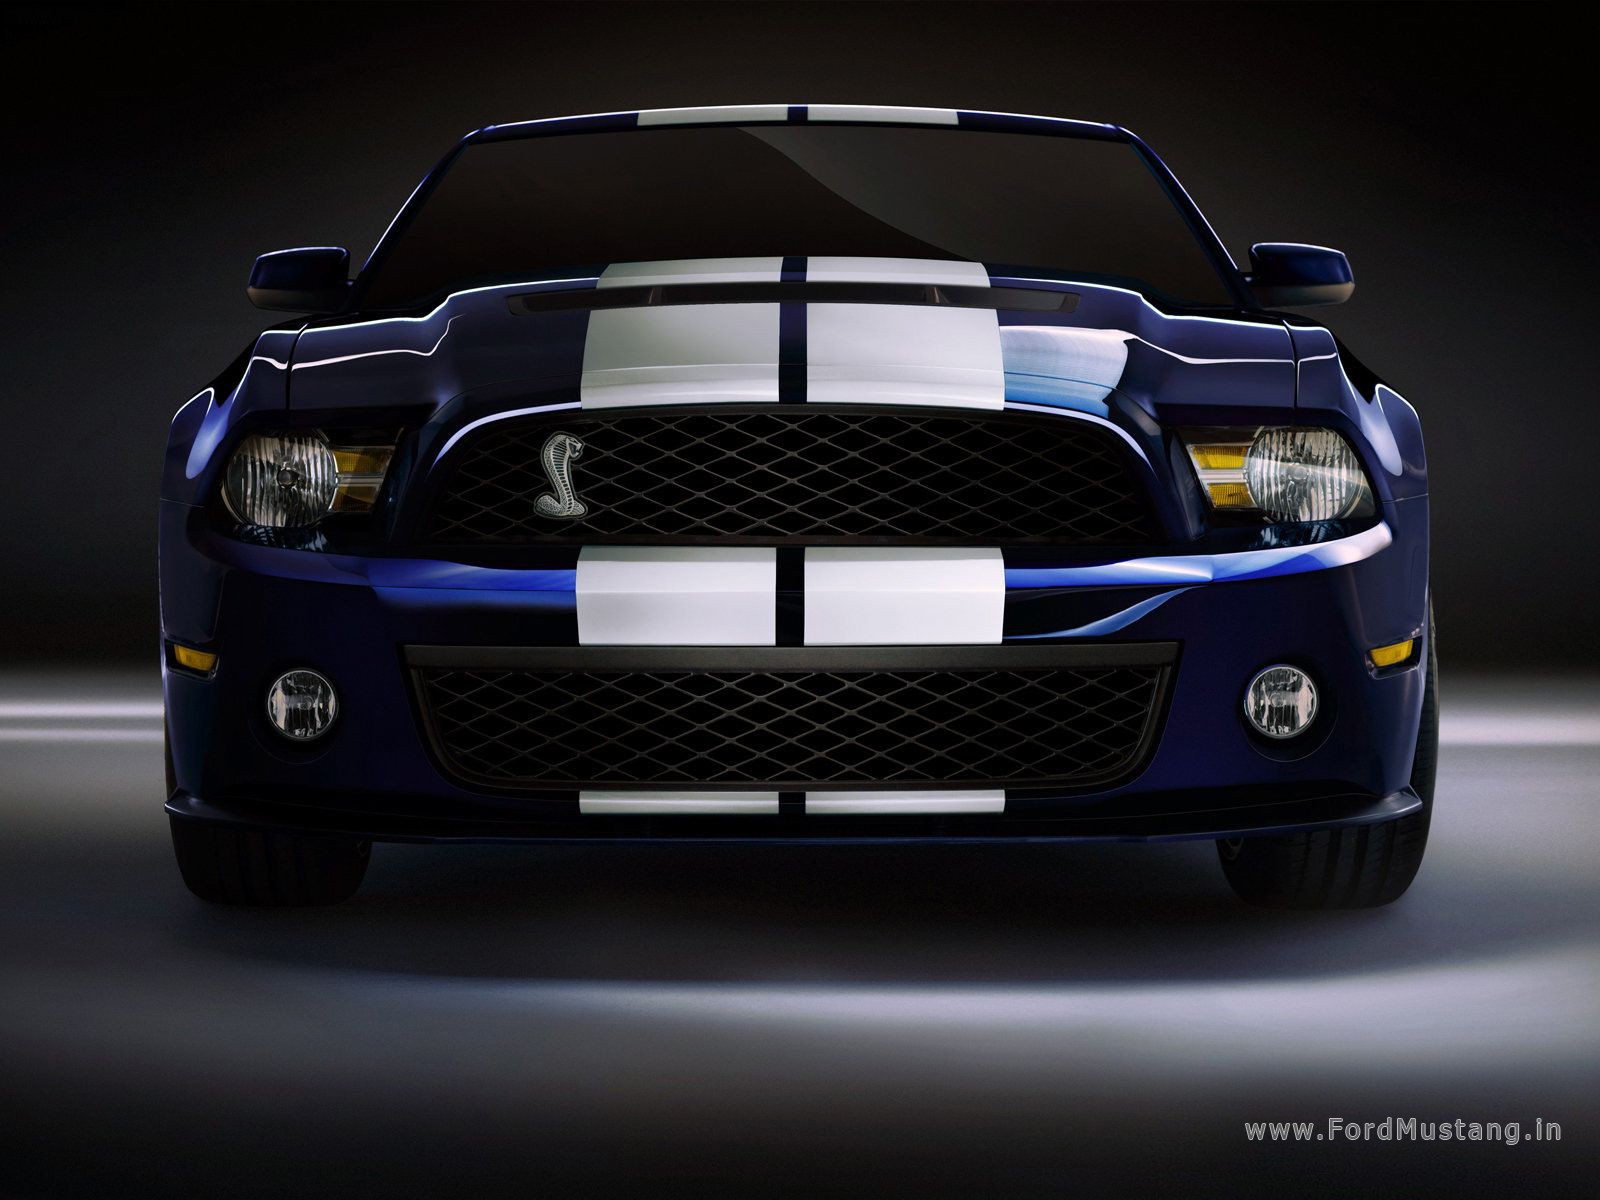 Ford Mustang Shelby Gt500 Wallpaper 65eodsuo More